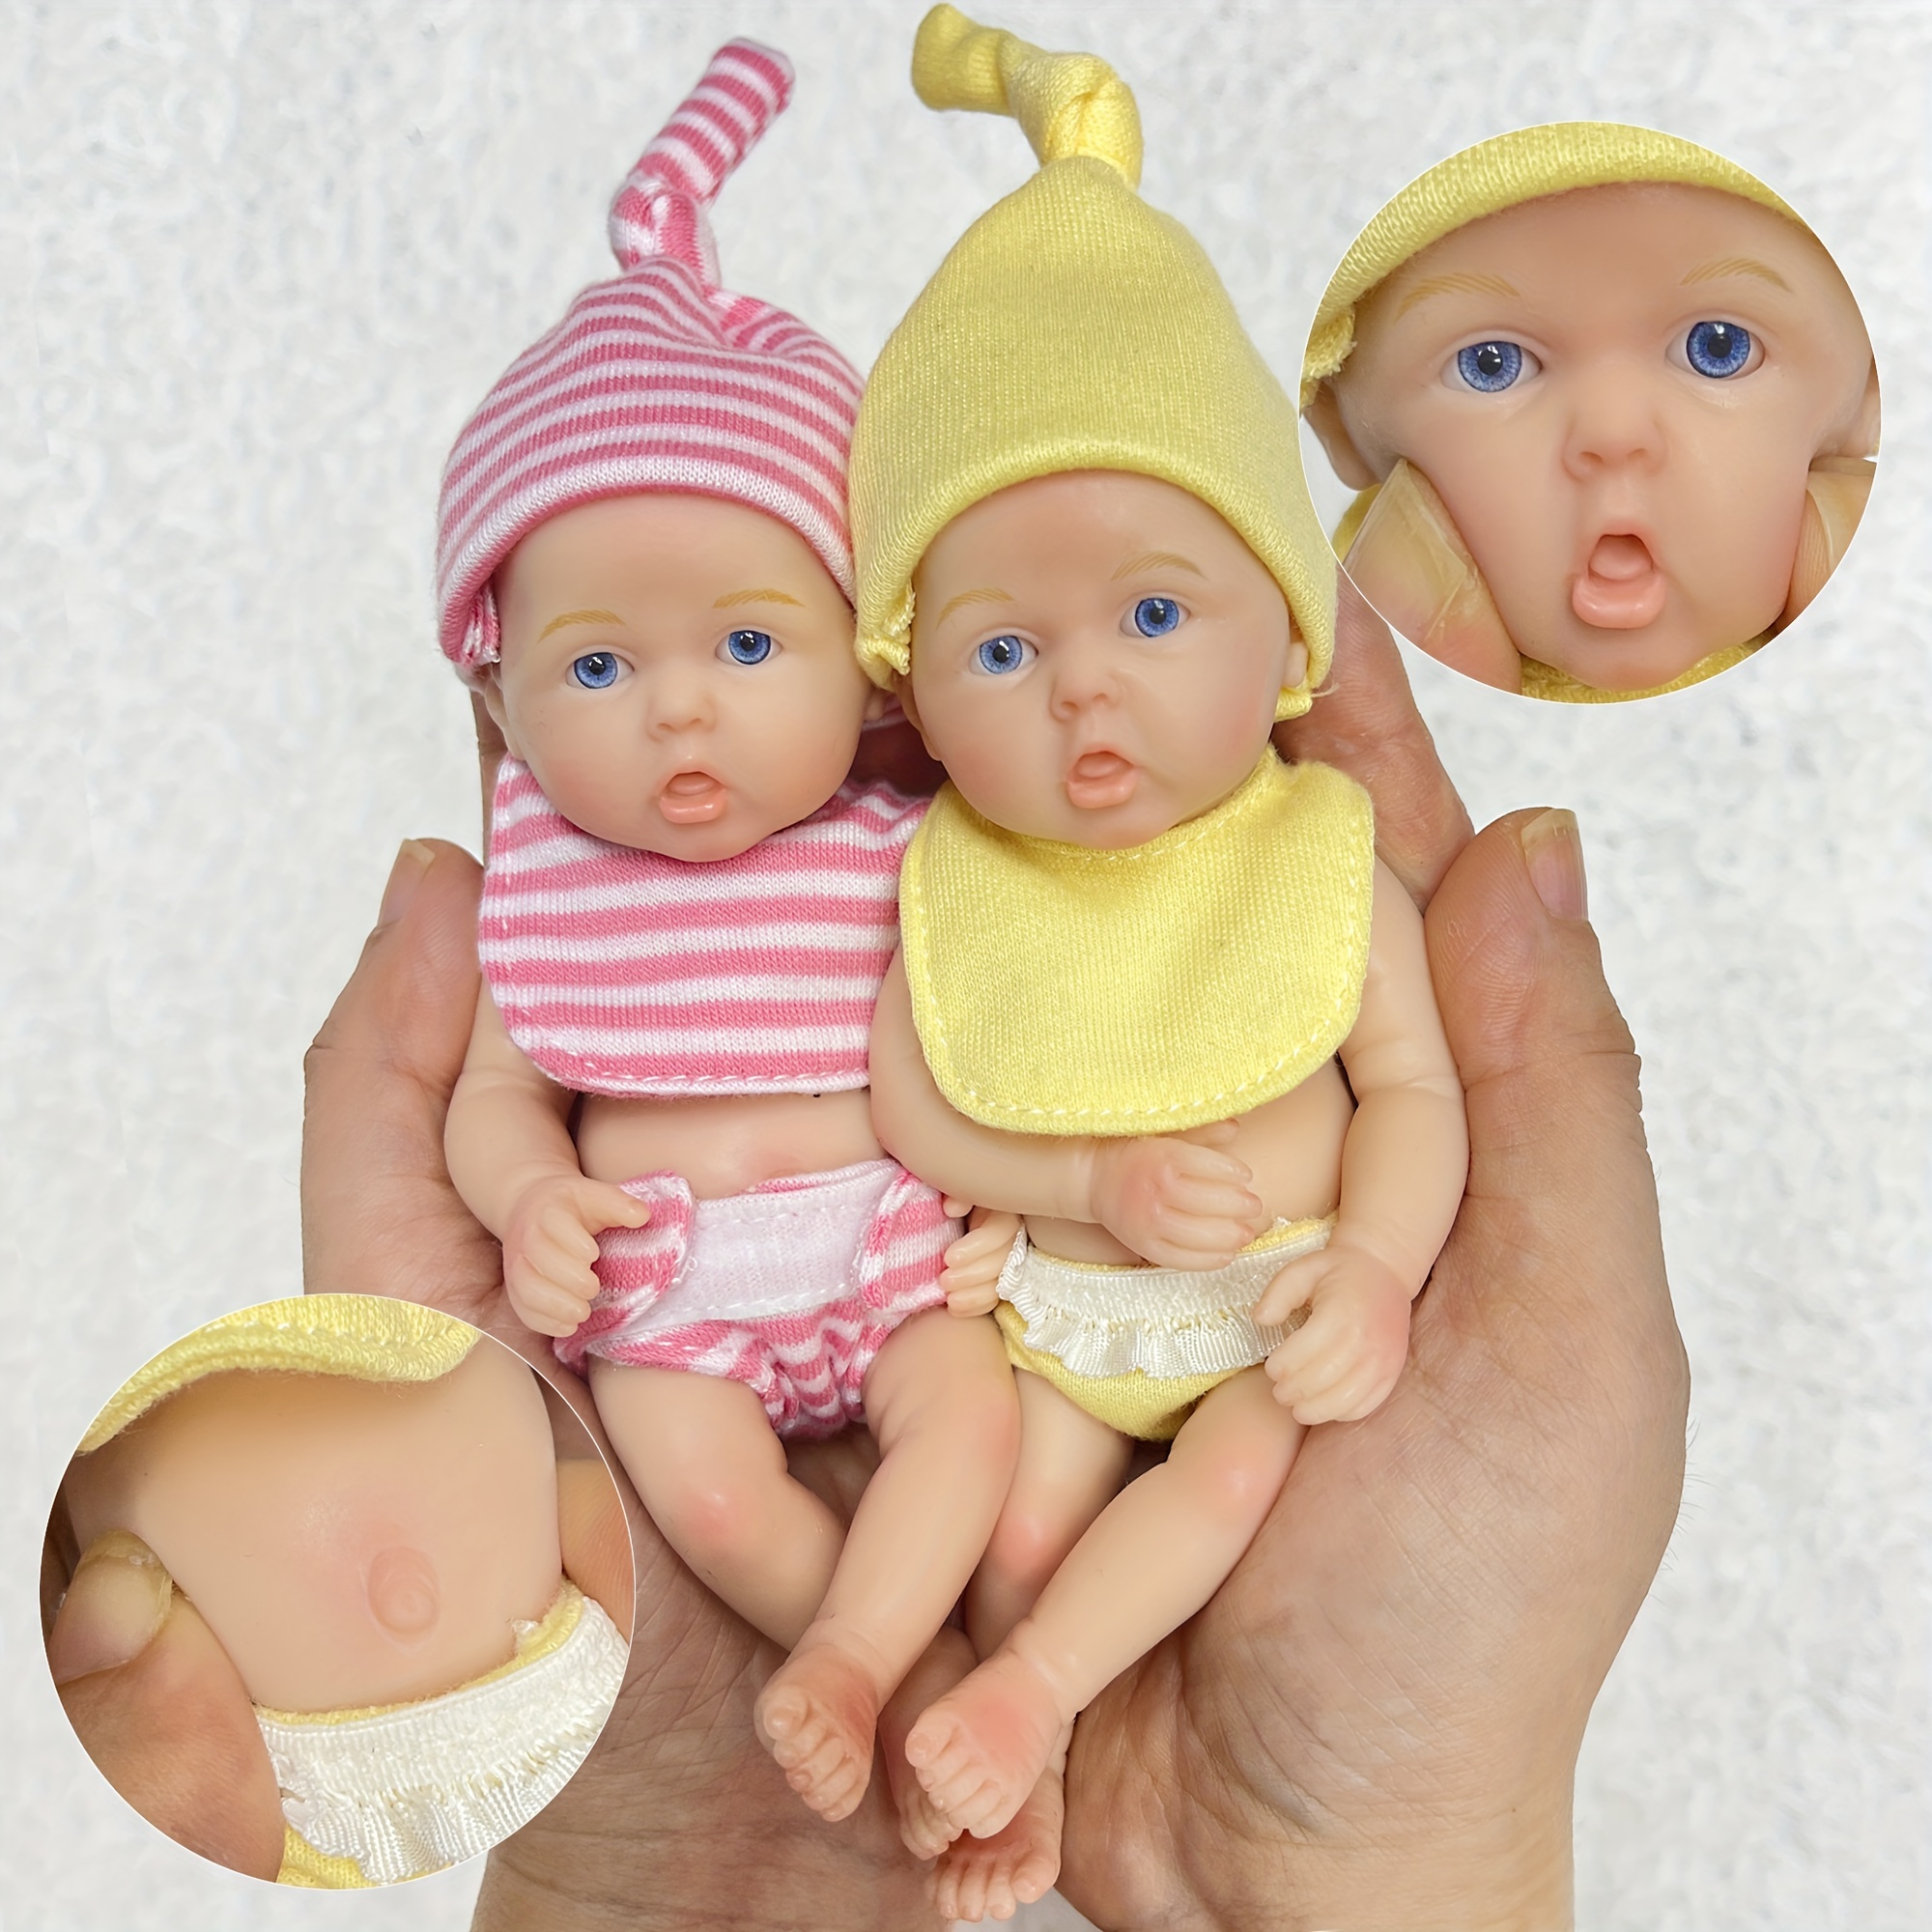 28cm Soft Full Body Solid Silicone Reborn Dolls Handmade Painted